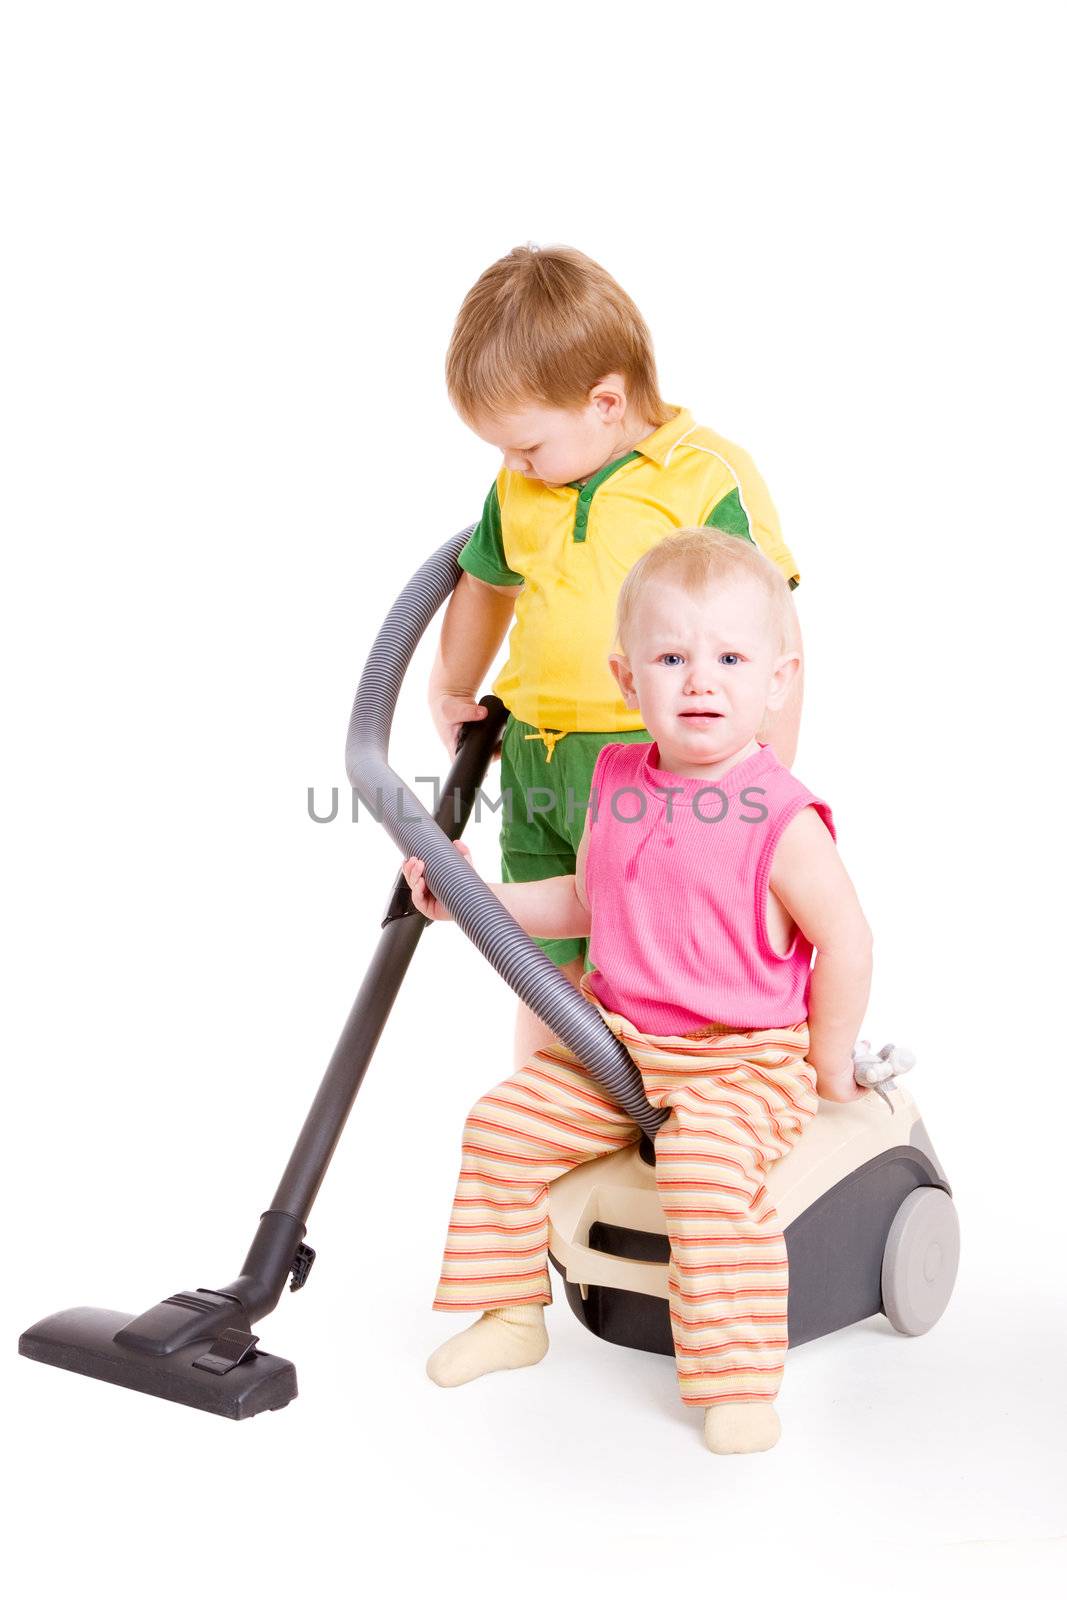 a small girl sitting on Vacuum cleaner and a small boy going in for cleaning